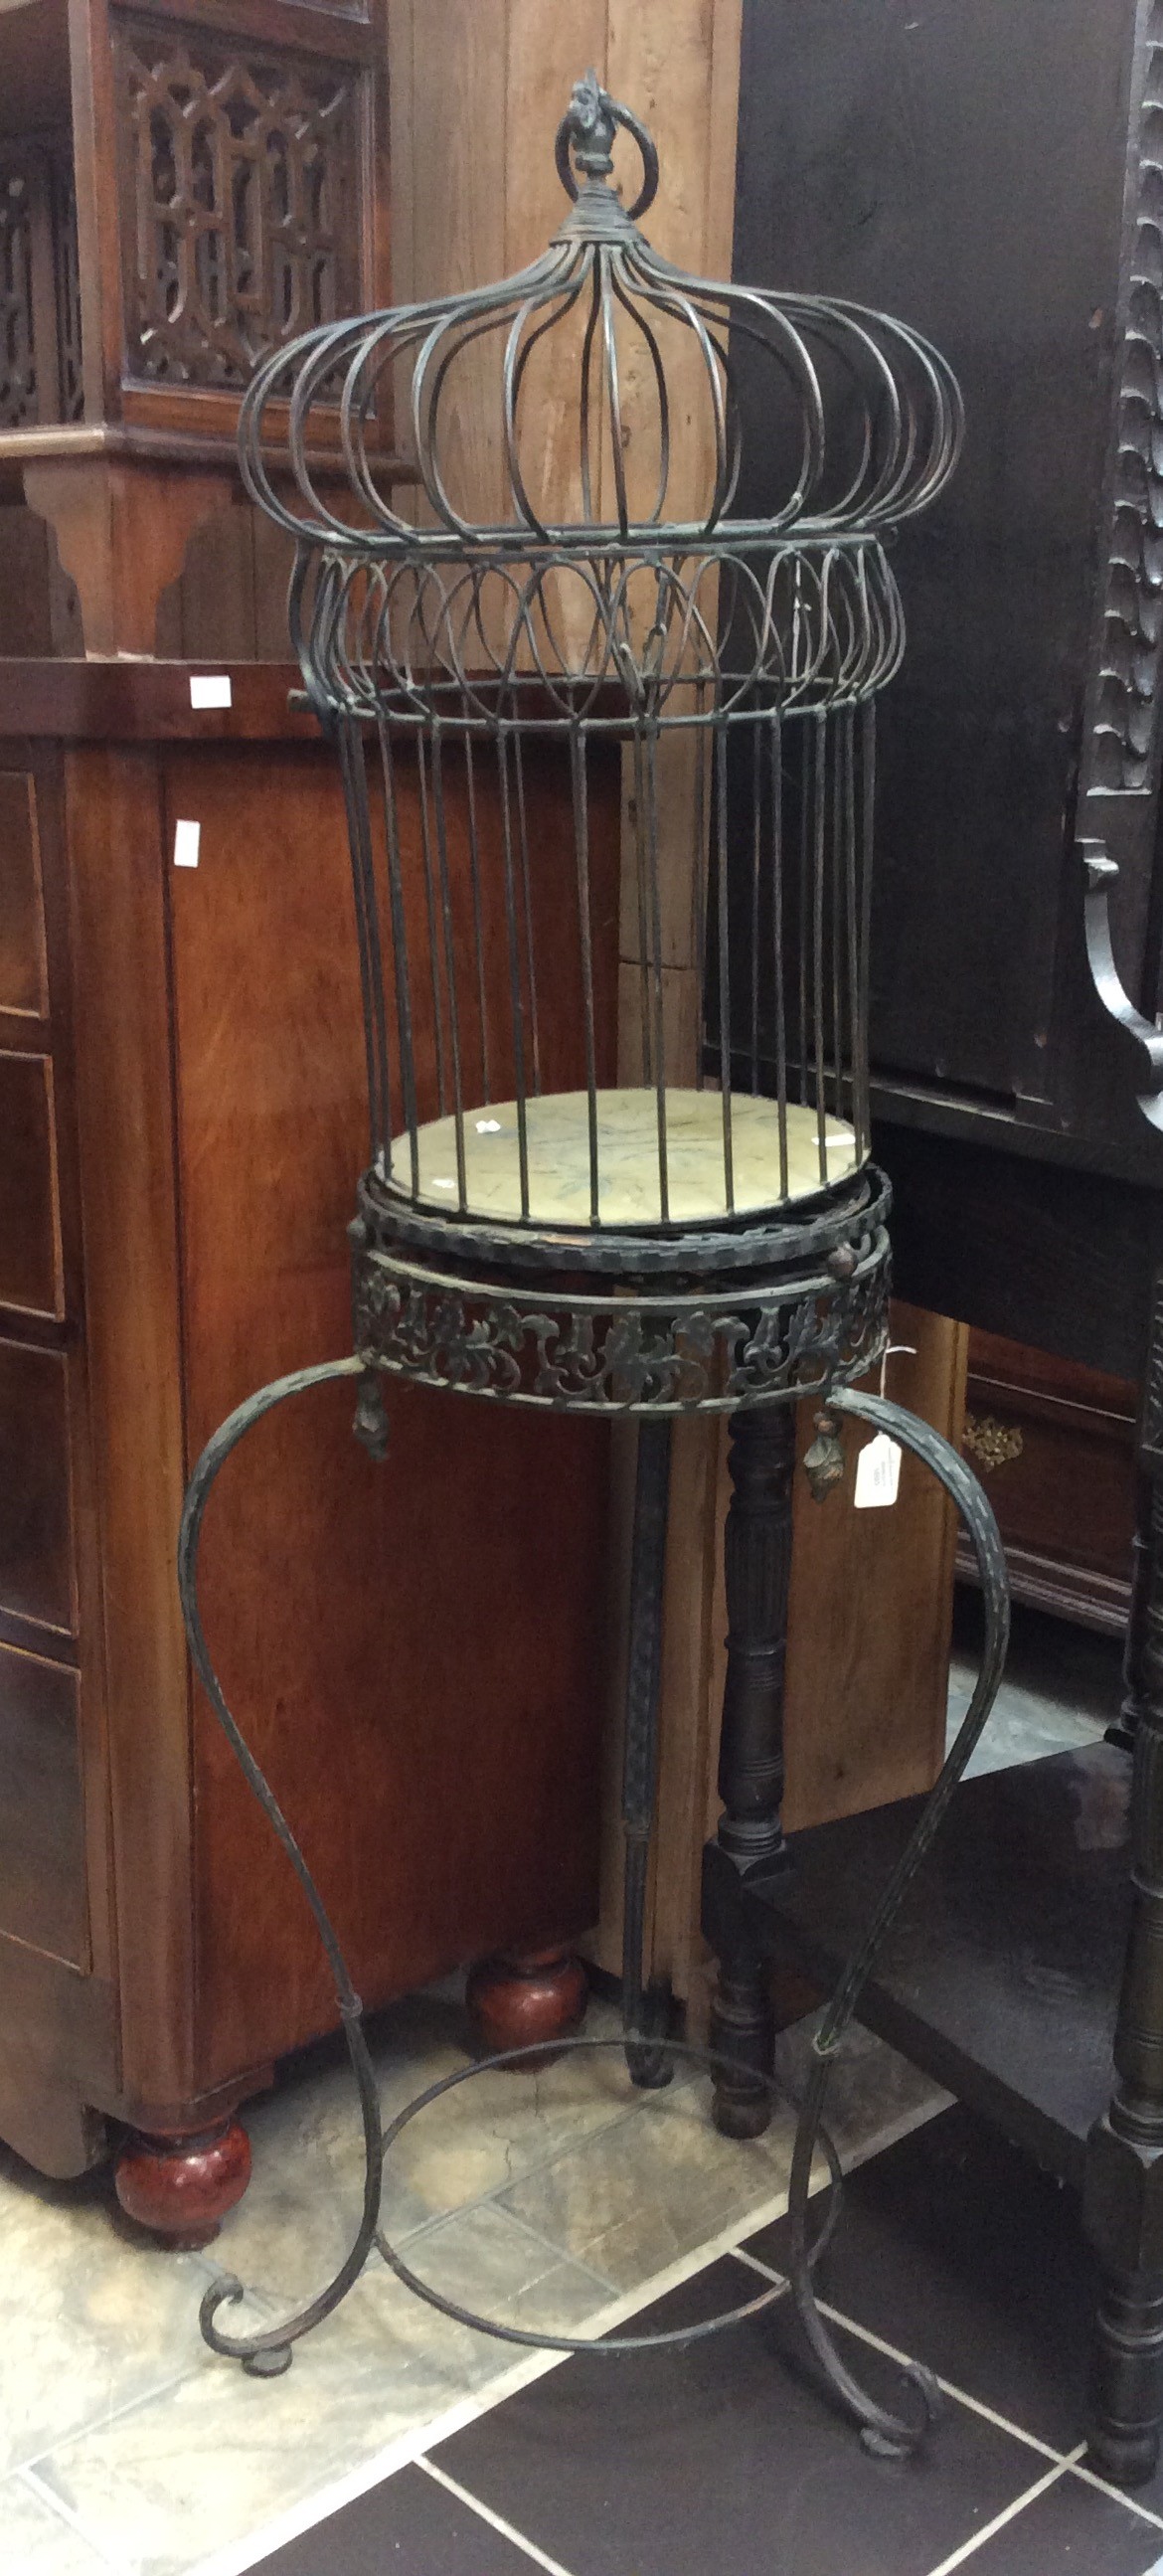 An ornamental cast metal table top bird cage